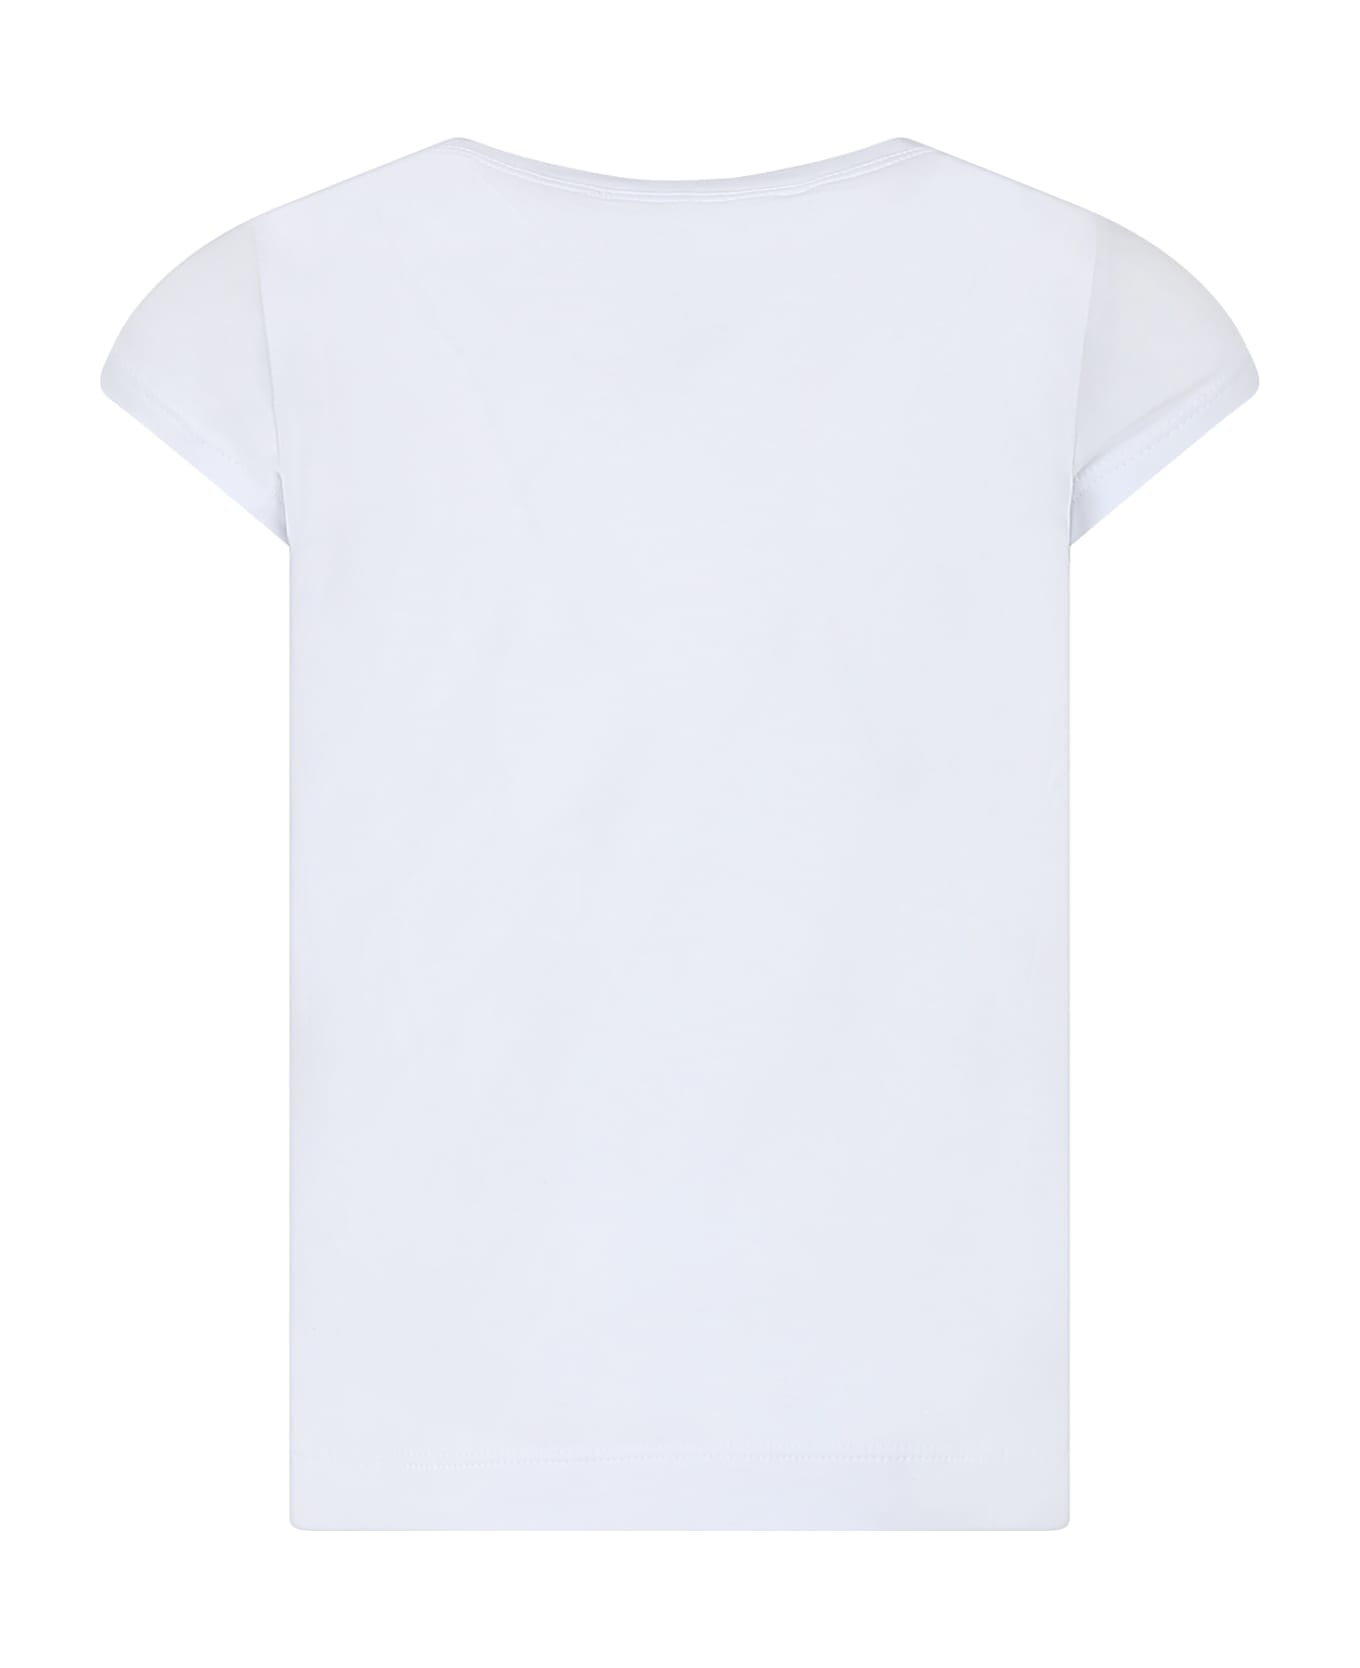 Monnalisa White T-shirt For Girl With Castle Print And Logo - WHITE